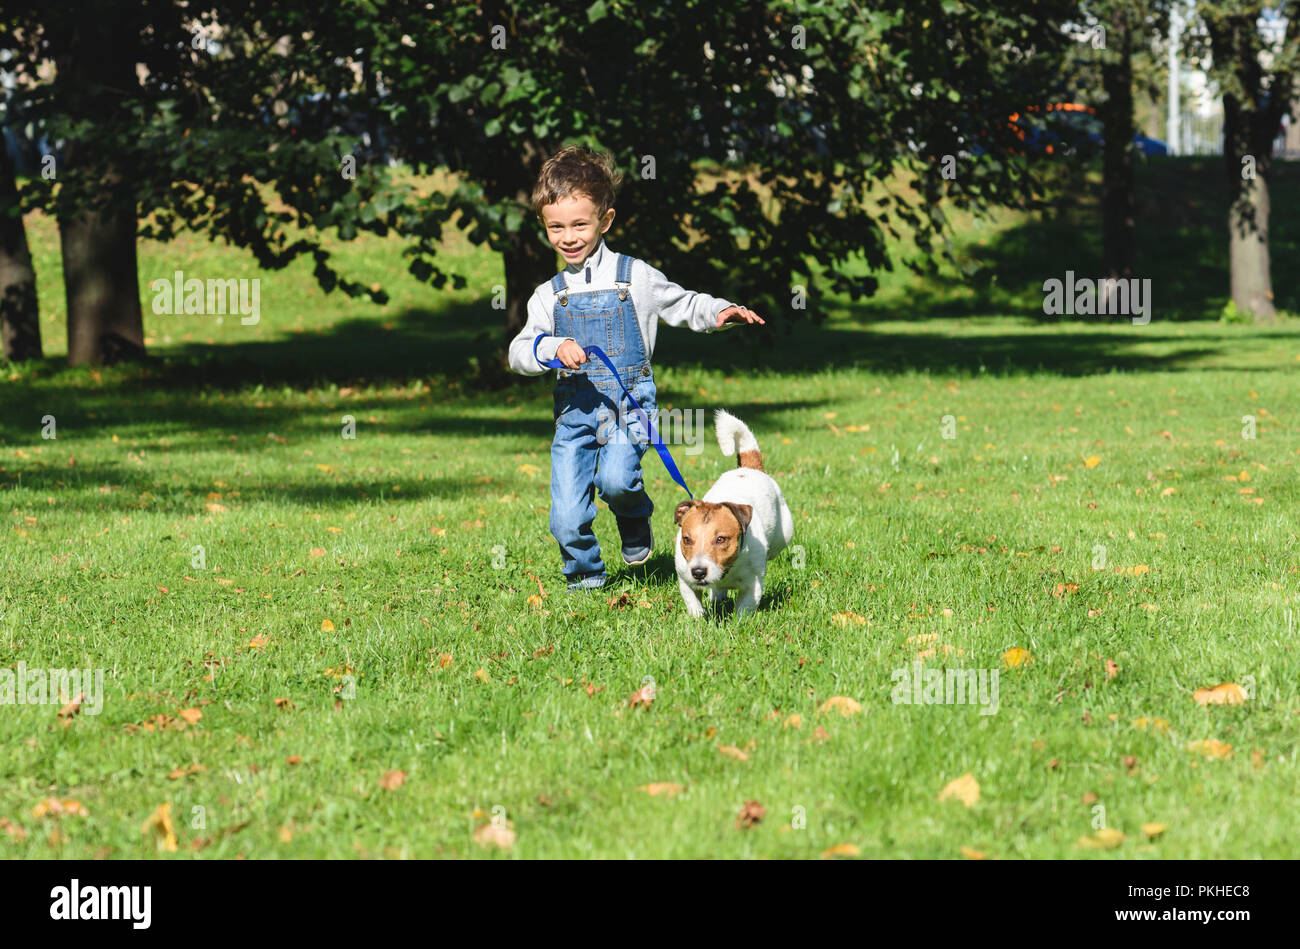 Kid boy running with dog on leash at park lawn Stock Photo